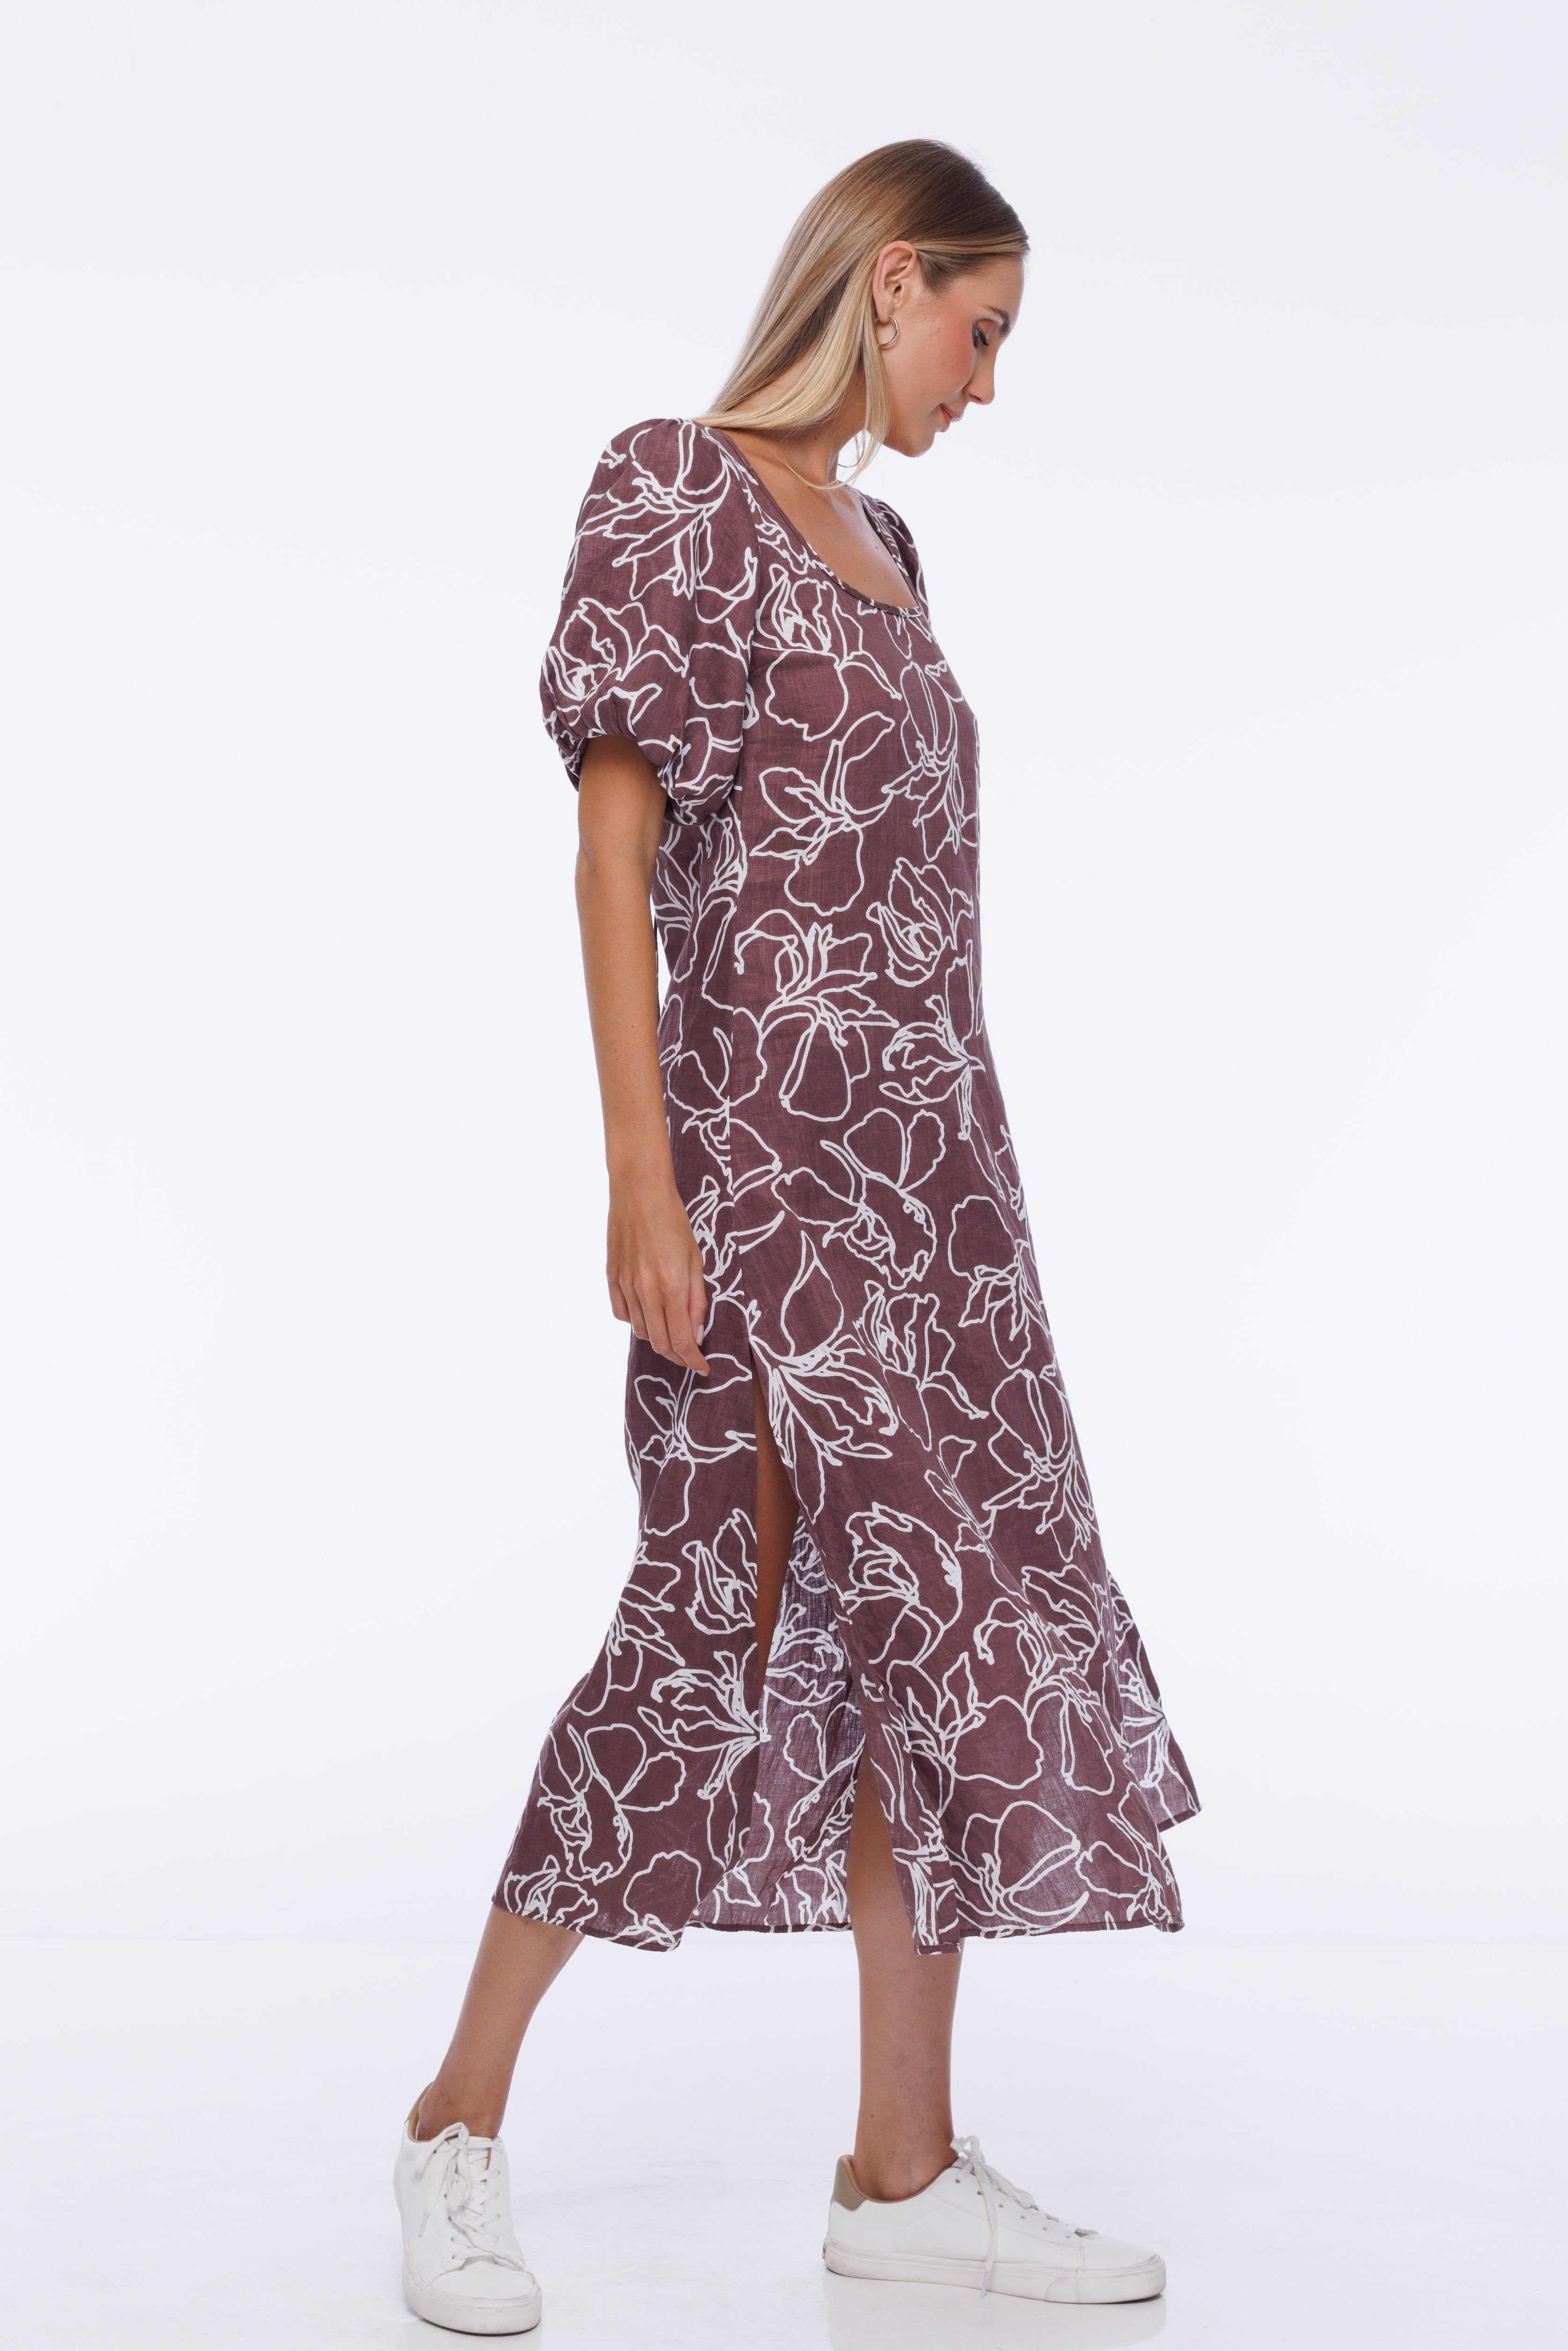 North West Dress - Exclusive Chocolate/Ivory Print